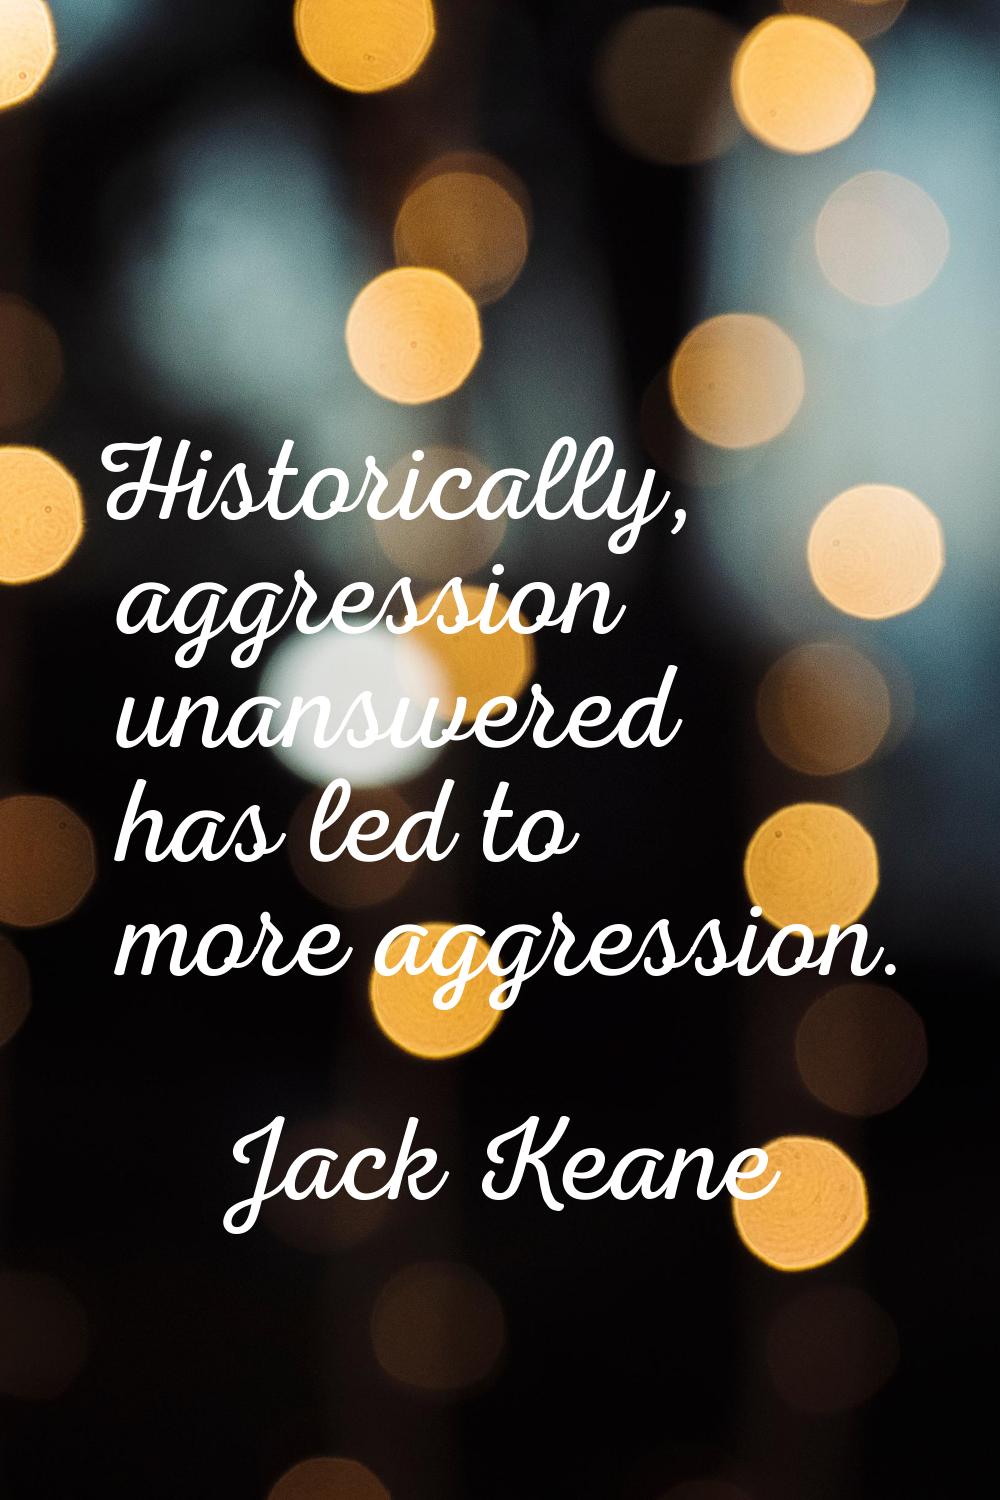 Historically, aggression unanswered has led to more aggression.